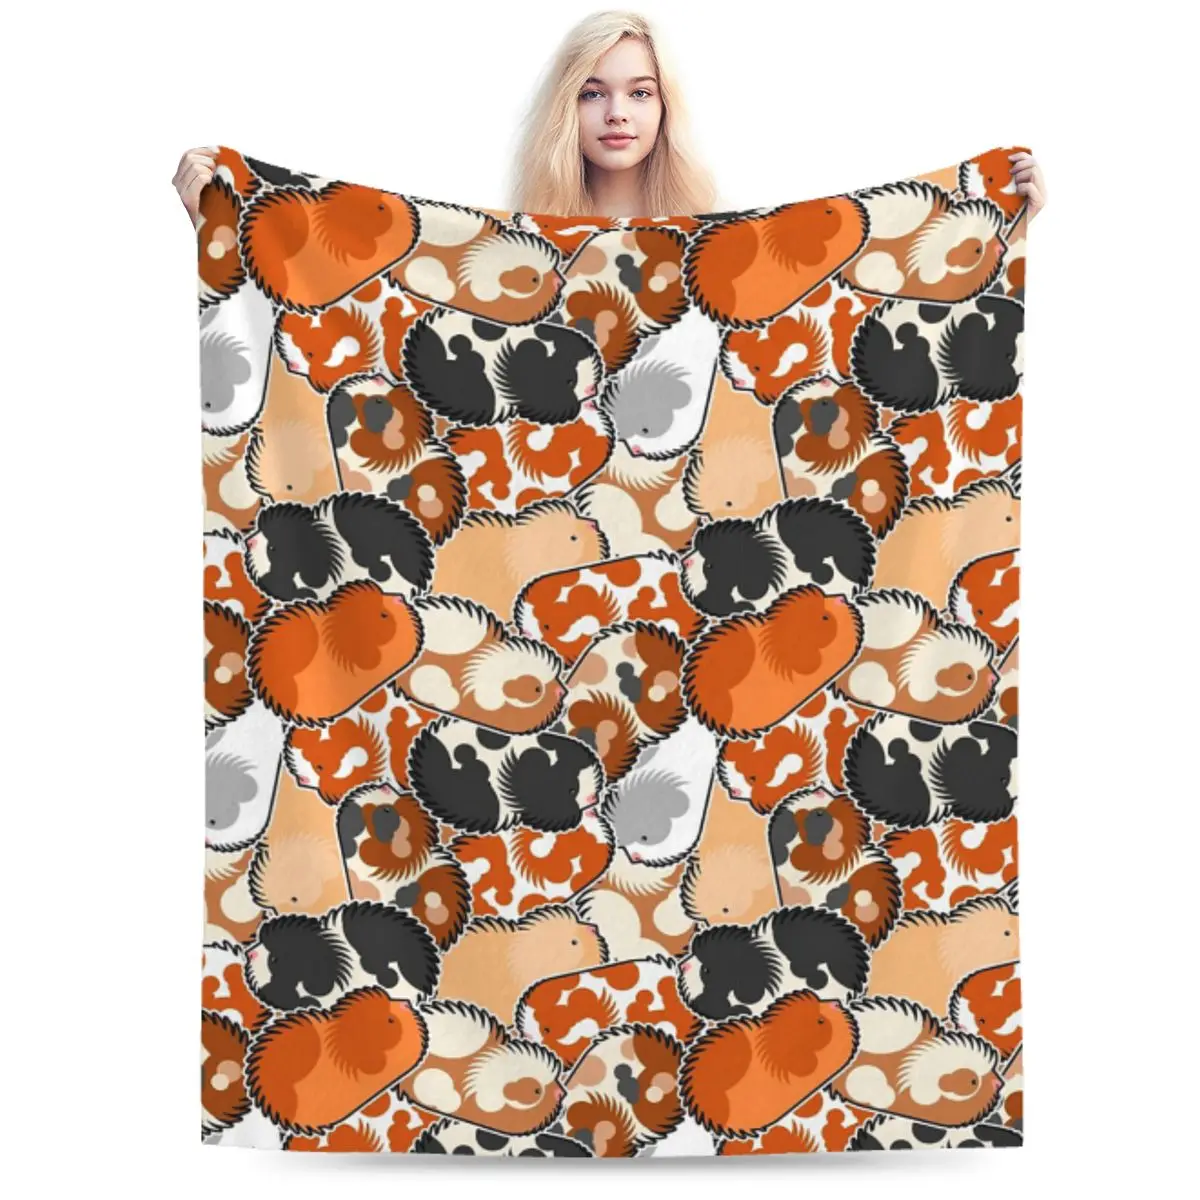 

Guinea Pig Funny Lovely Soft Flannel Throw Blanket for Couch Bed Sofa Cover Blanket Warm Blankets Travel Blanket